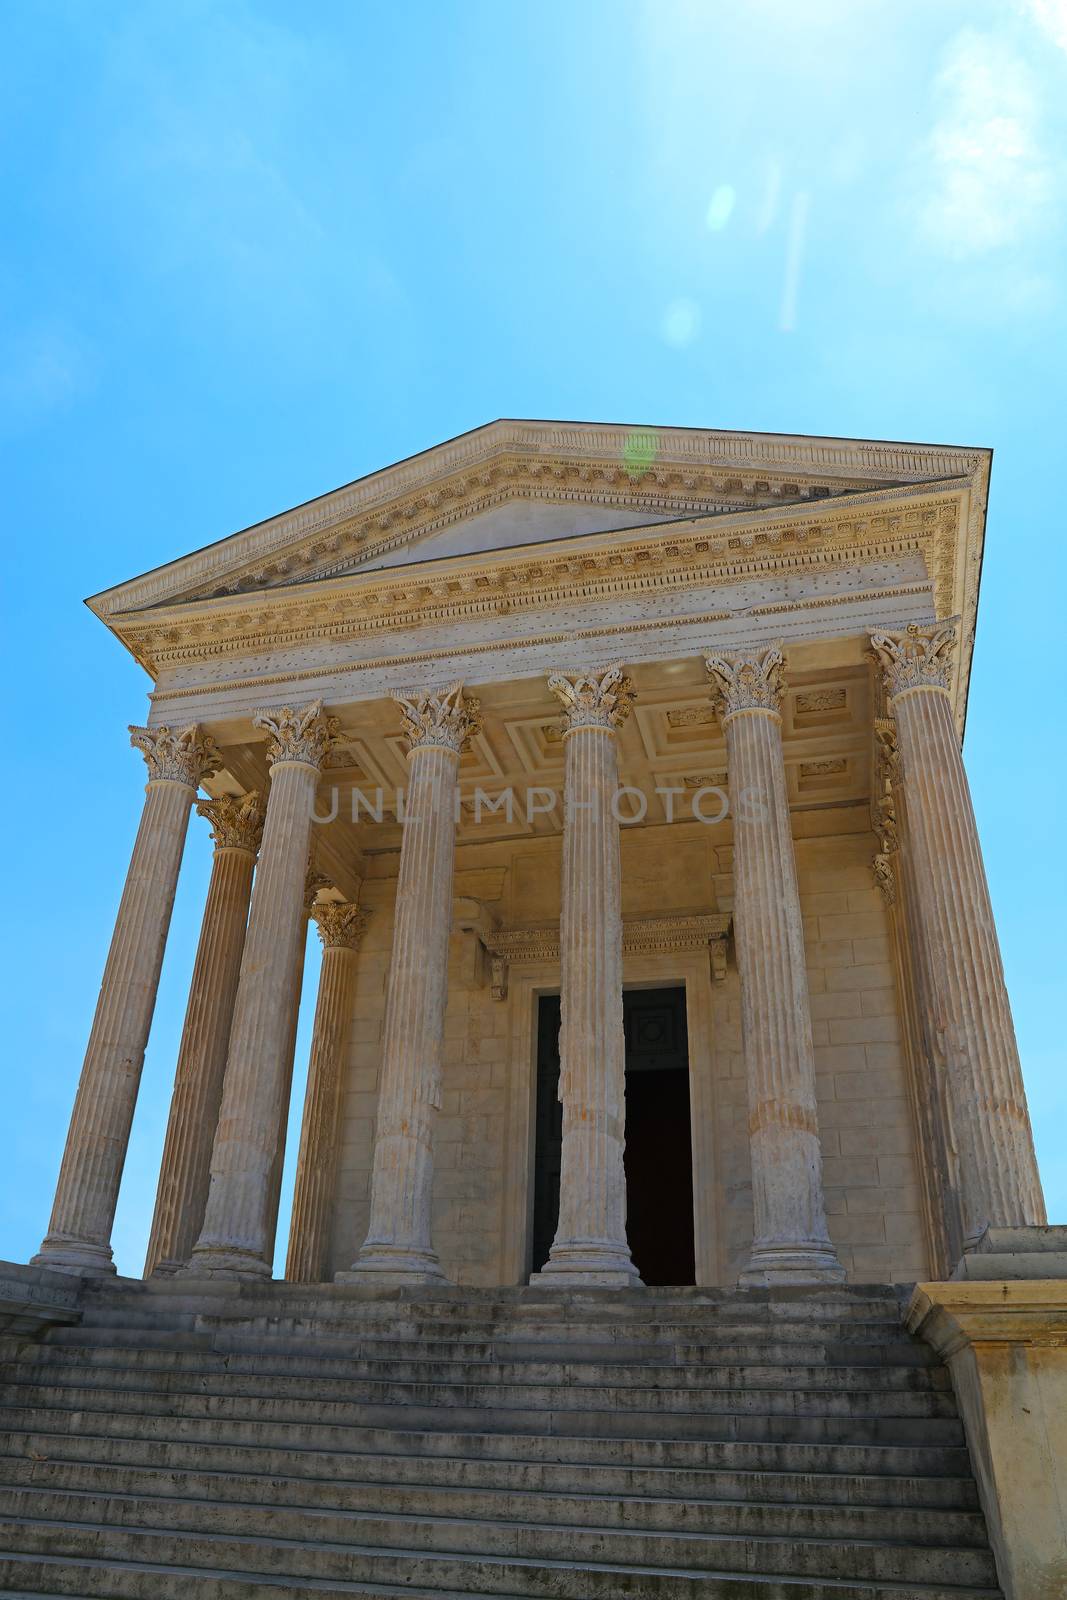 Front view of Maison Carree (square house), ancient building in Nimes, France, one of the best preserved antique Roman temple facades, low angle